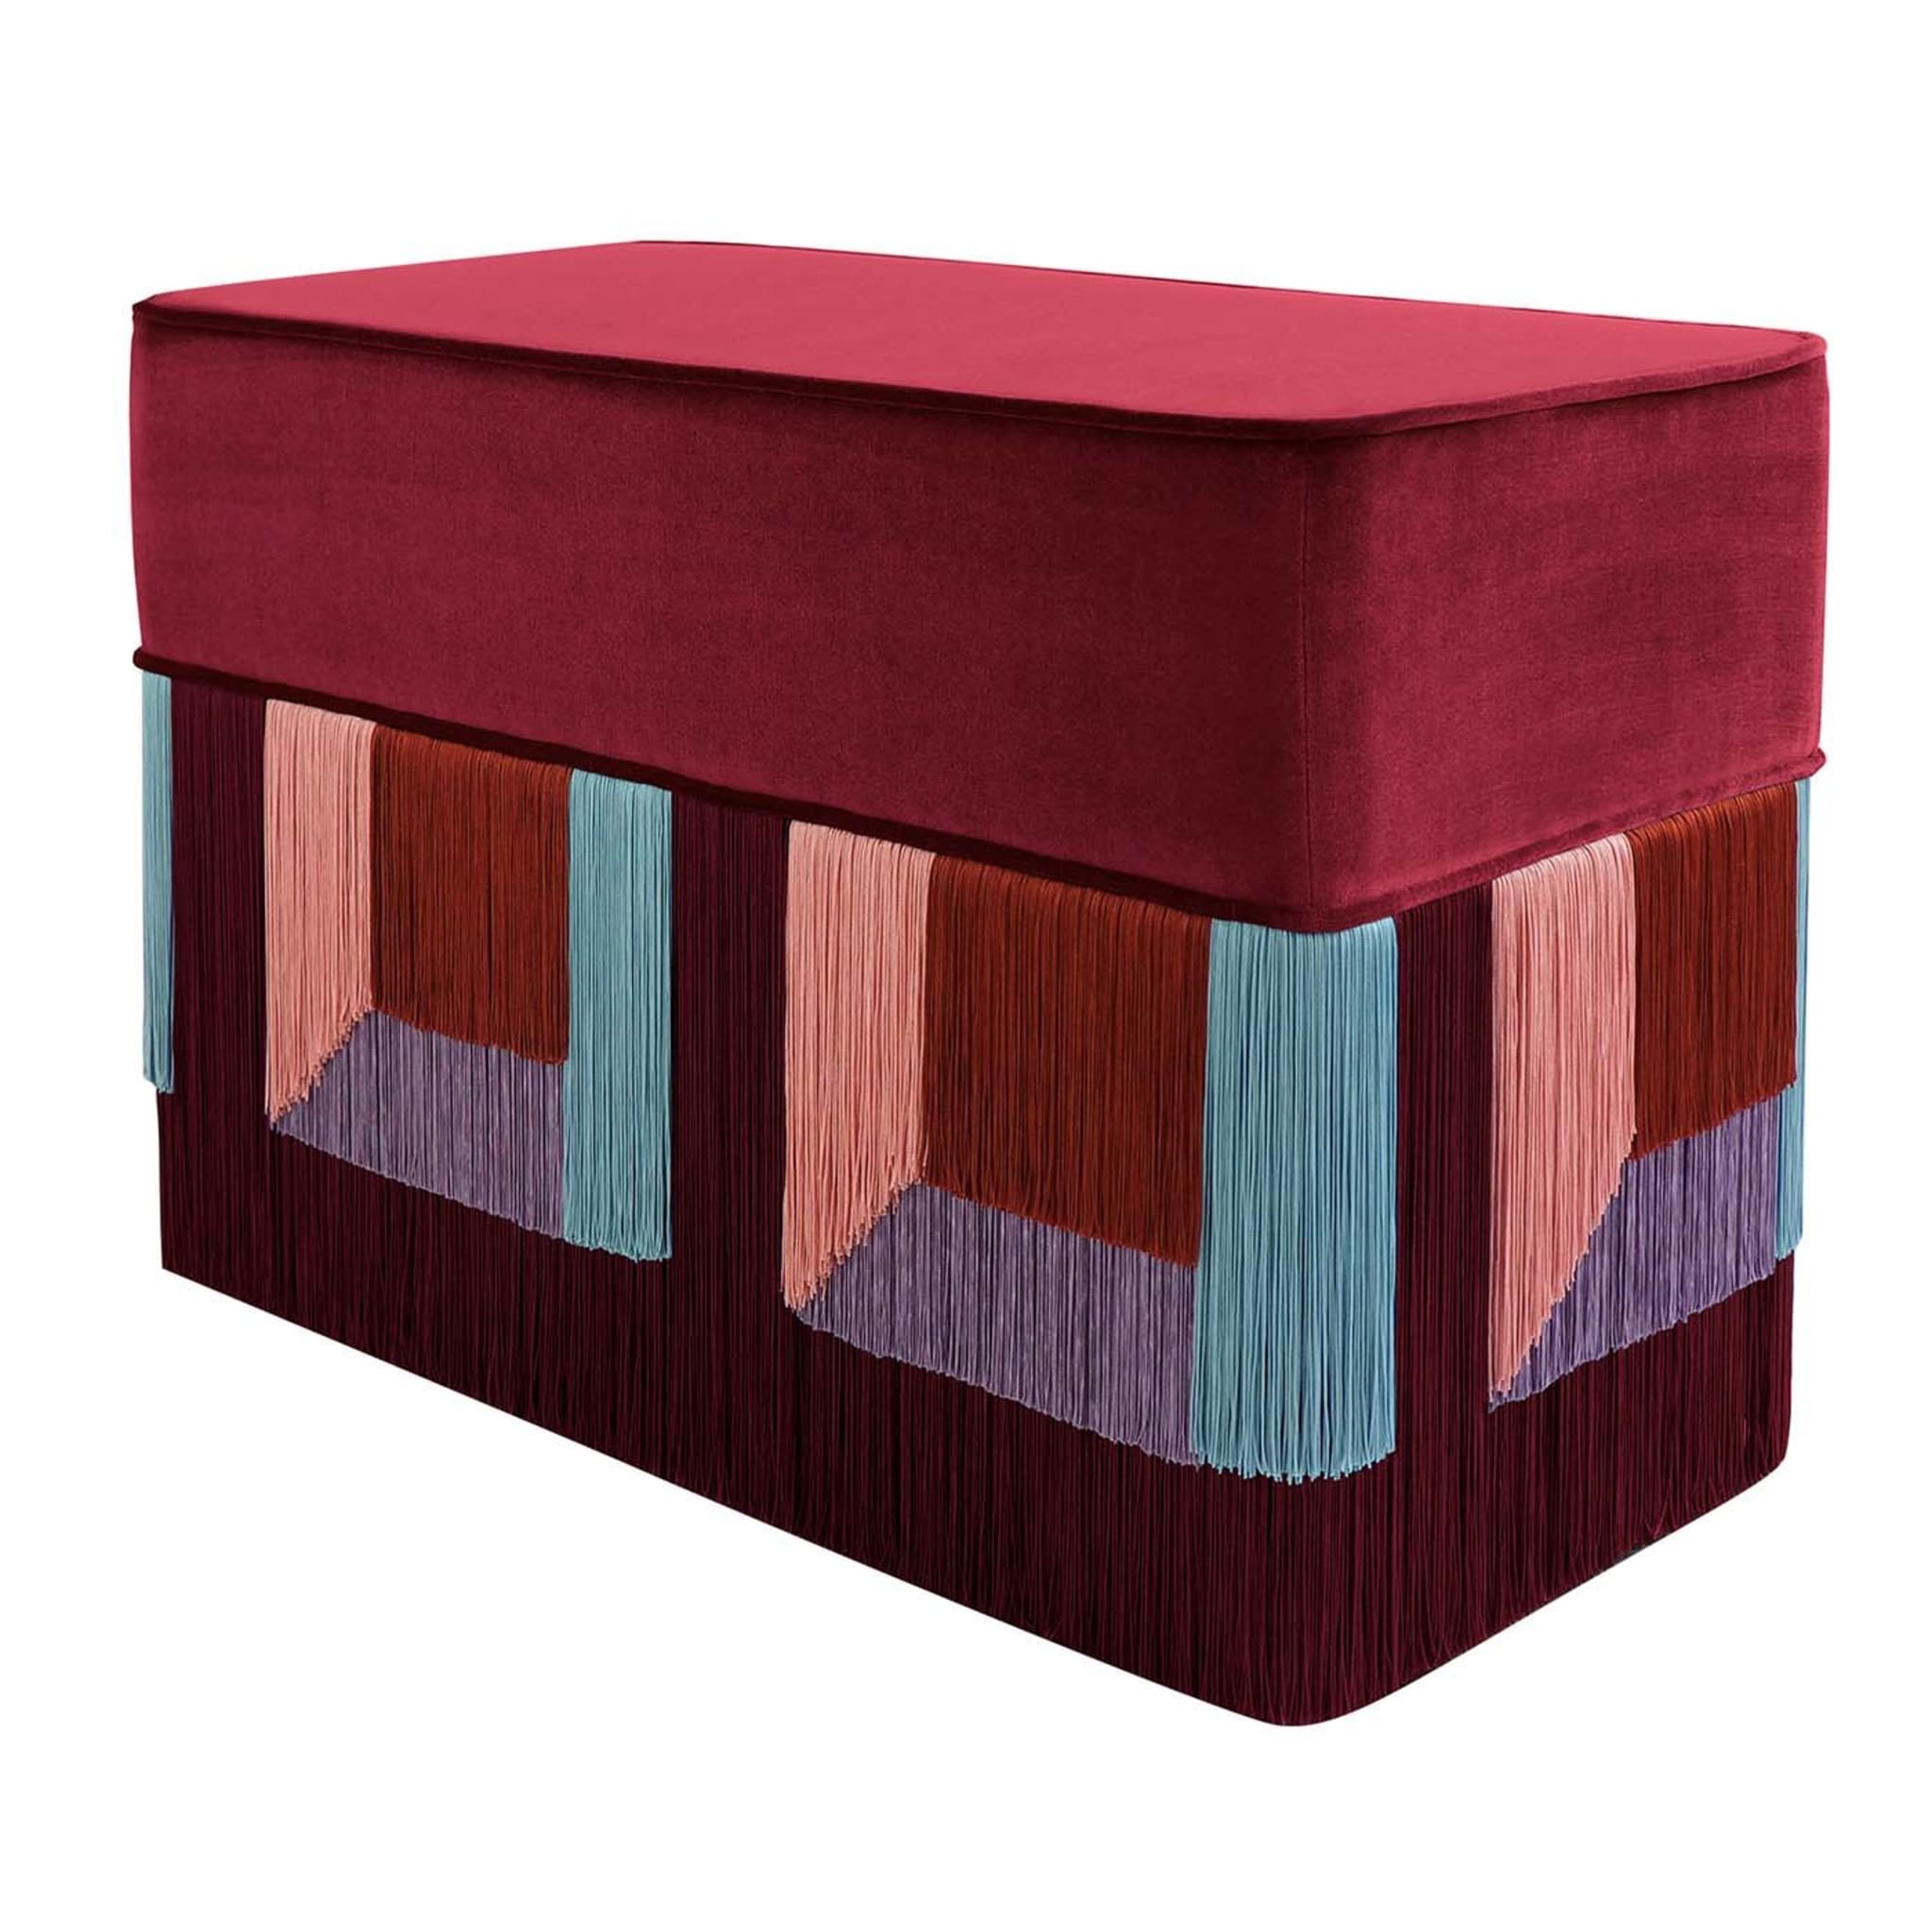 Couture Geometric Gio' Bench - Main view